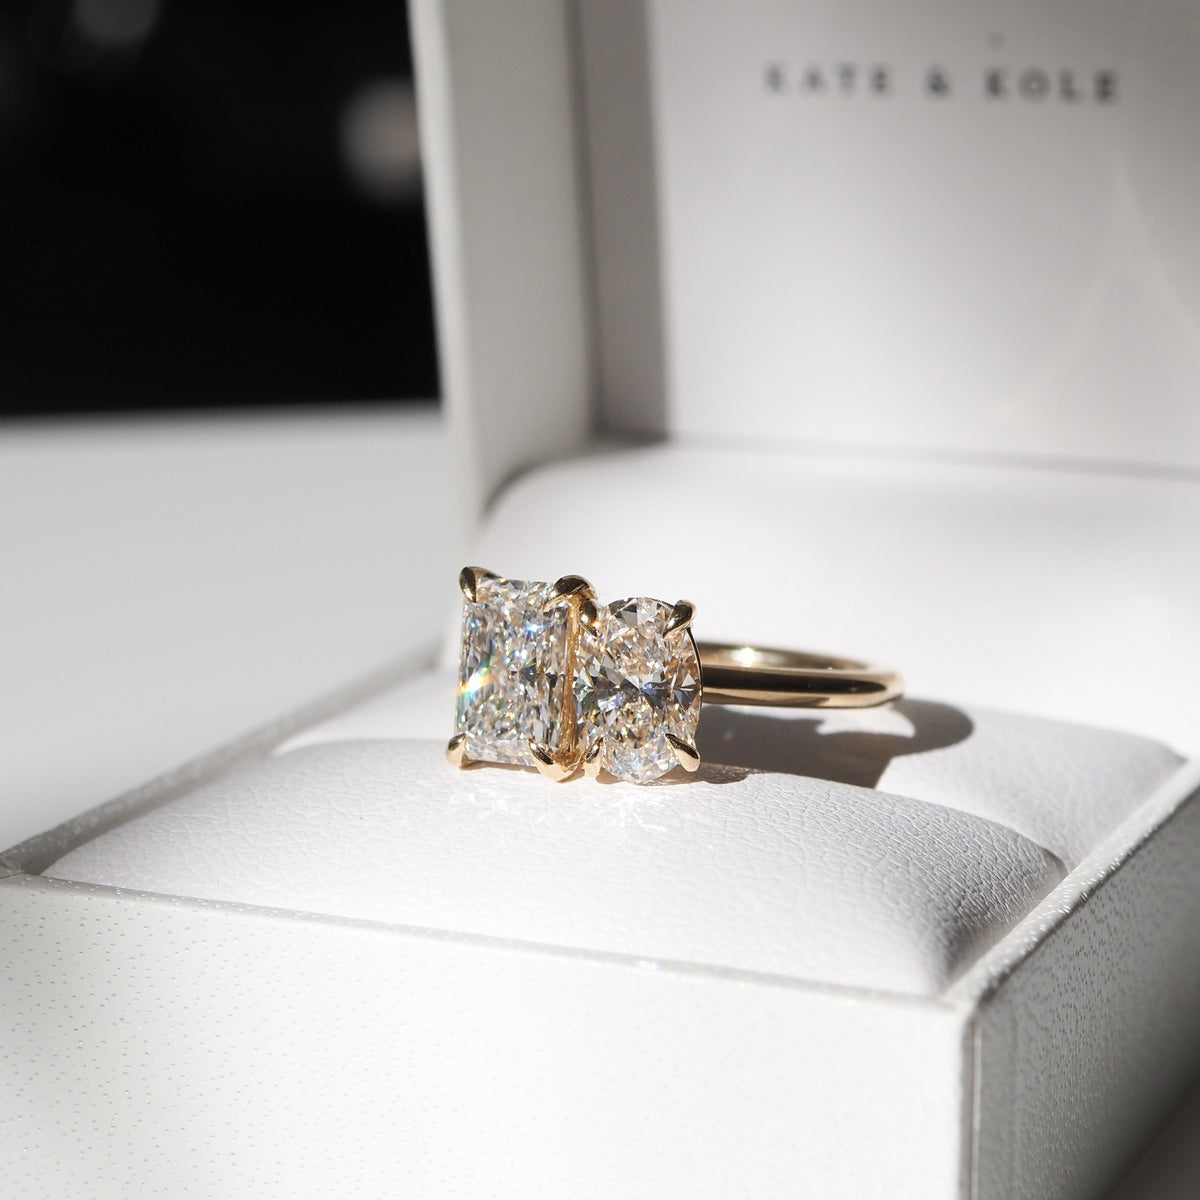 Oval and radiant lab-grown diamonds are paired side by side to represent two souls meeting as one.  Set in solid 18ct yellow gold with a 1.8mm round band profile. The stones pictures are a 2ct oval and 2.05ct radiant lab-grown diamond. 